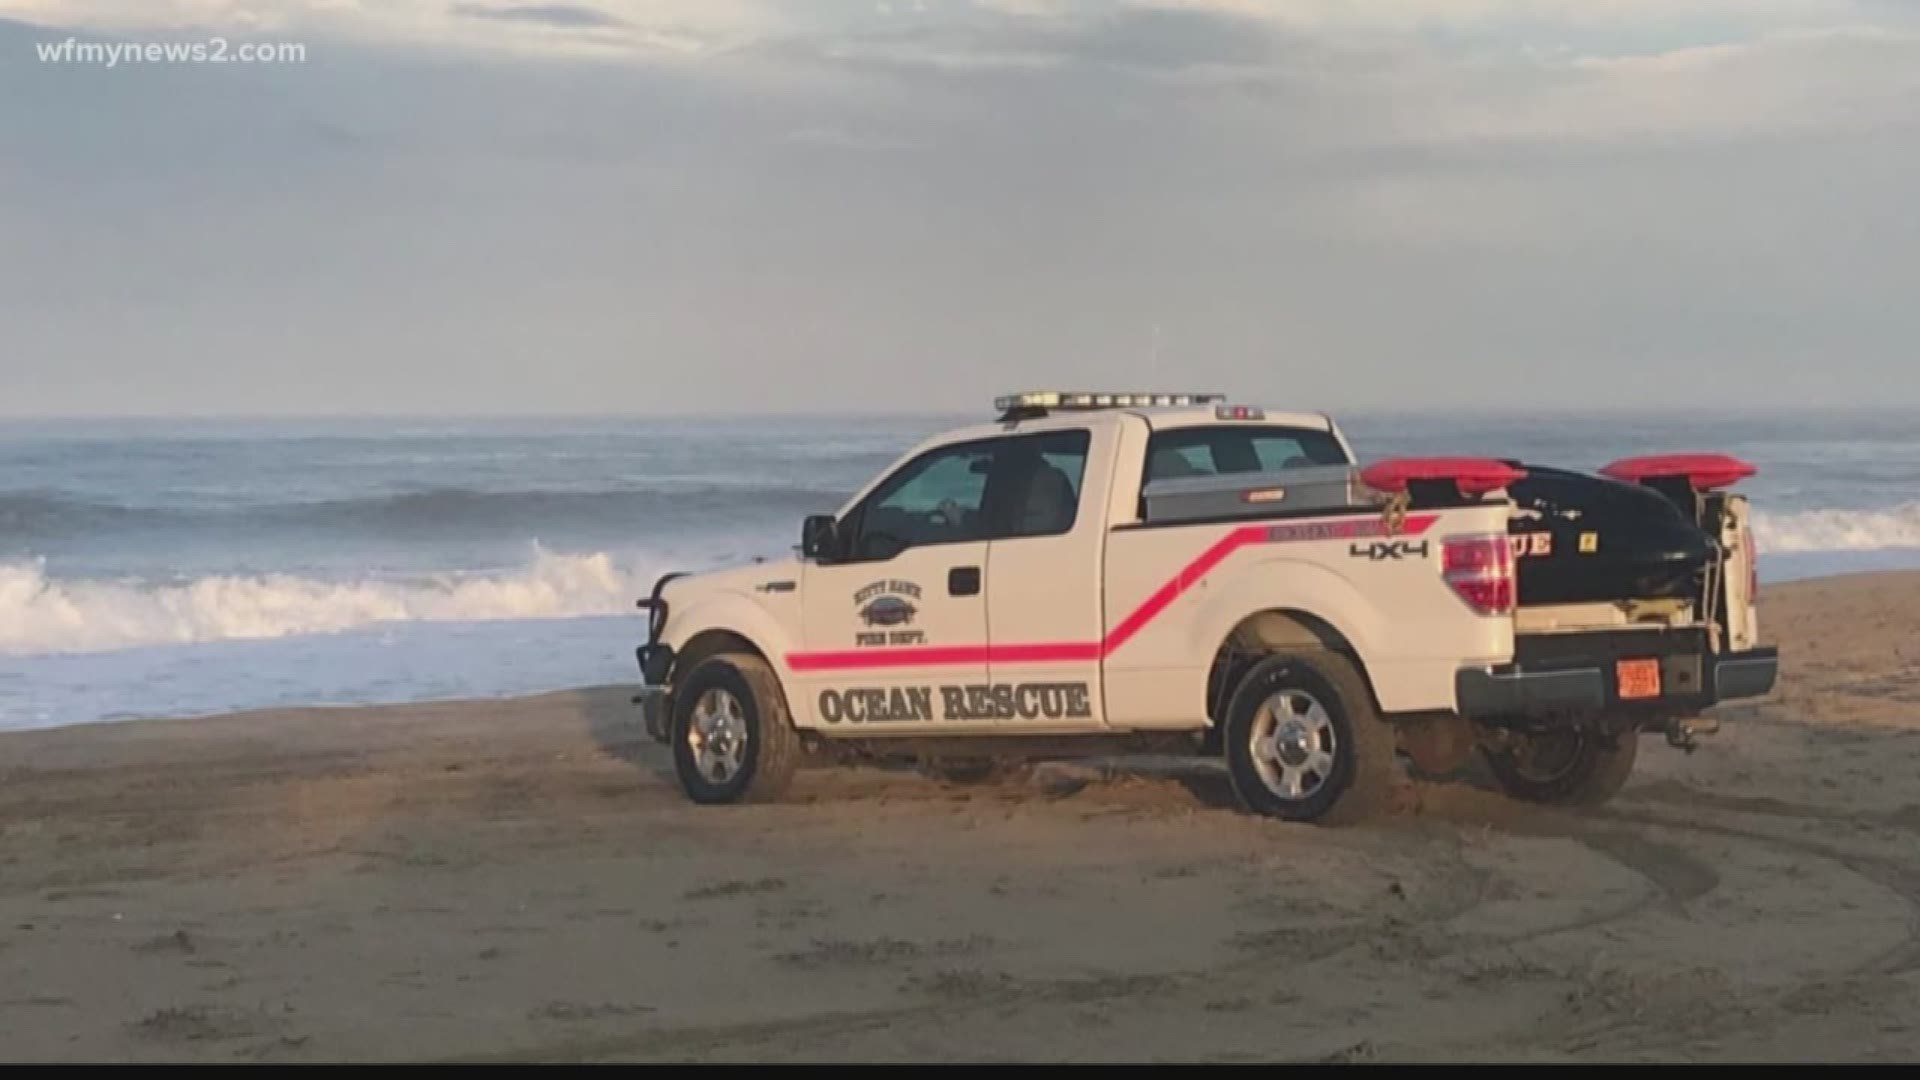 A boy was swept away while walking along the shore with his mother when a wave crashed in and swept him away.